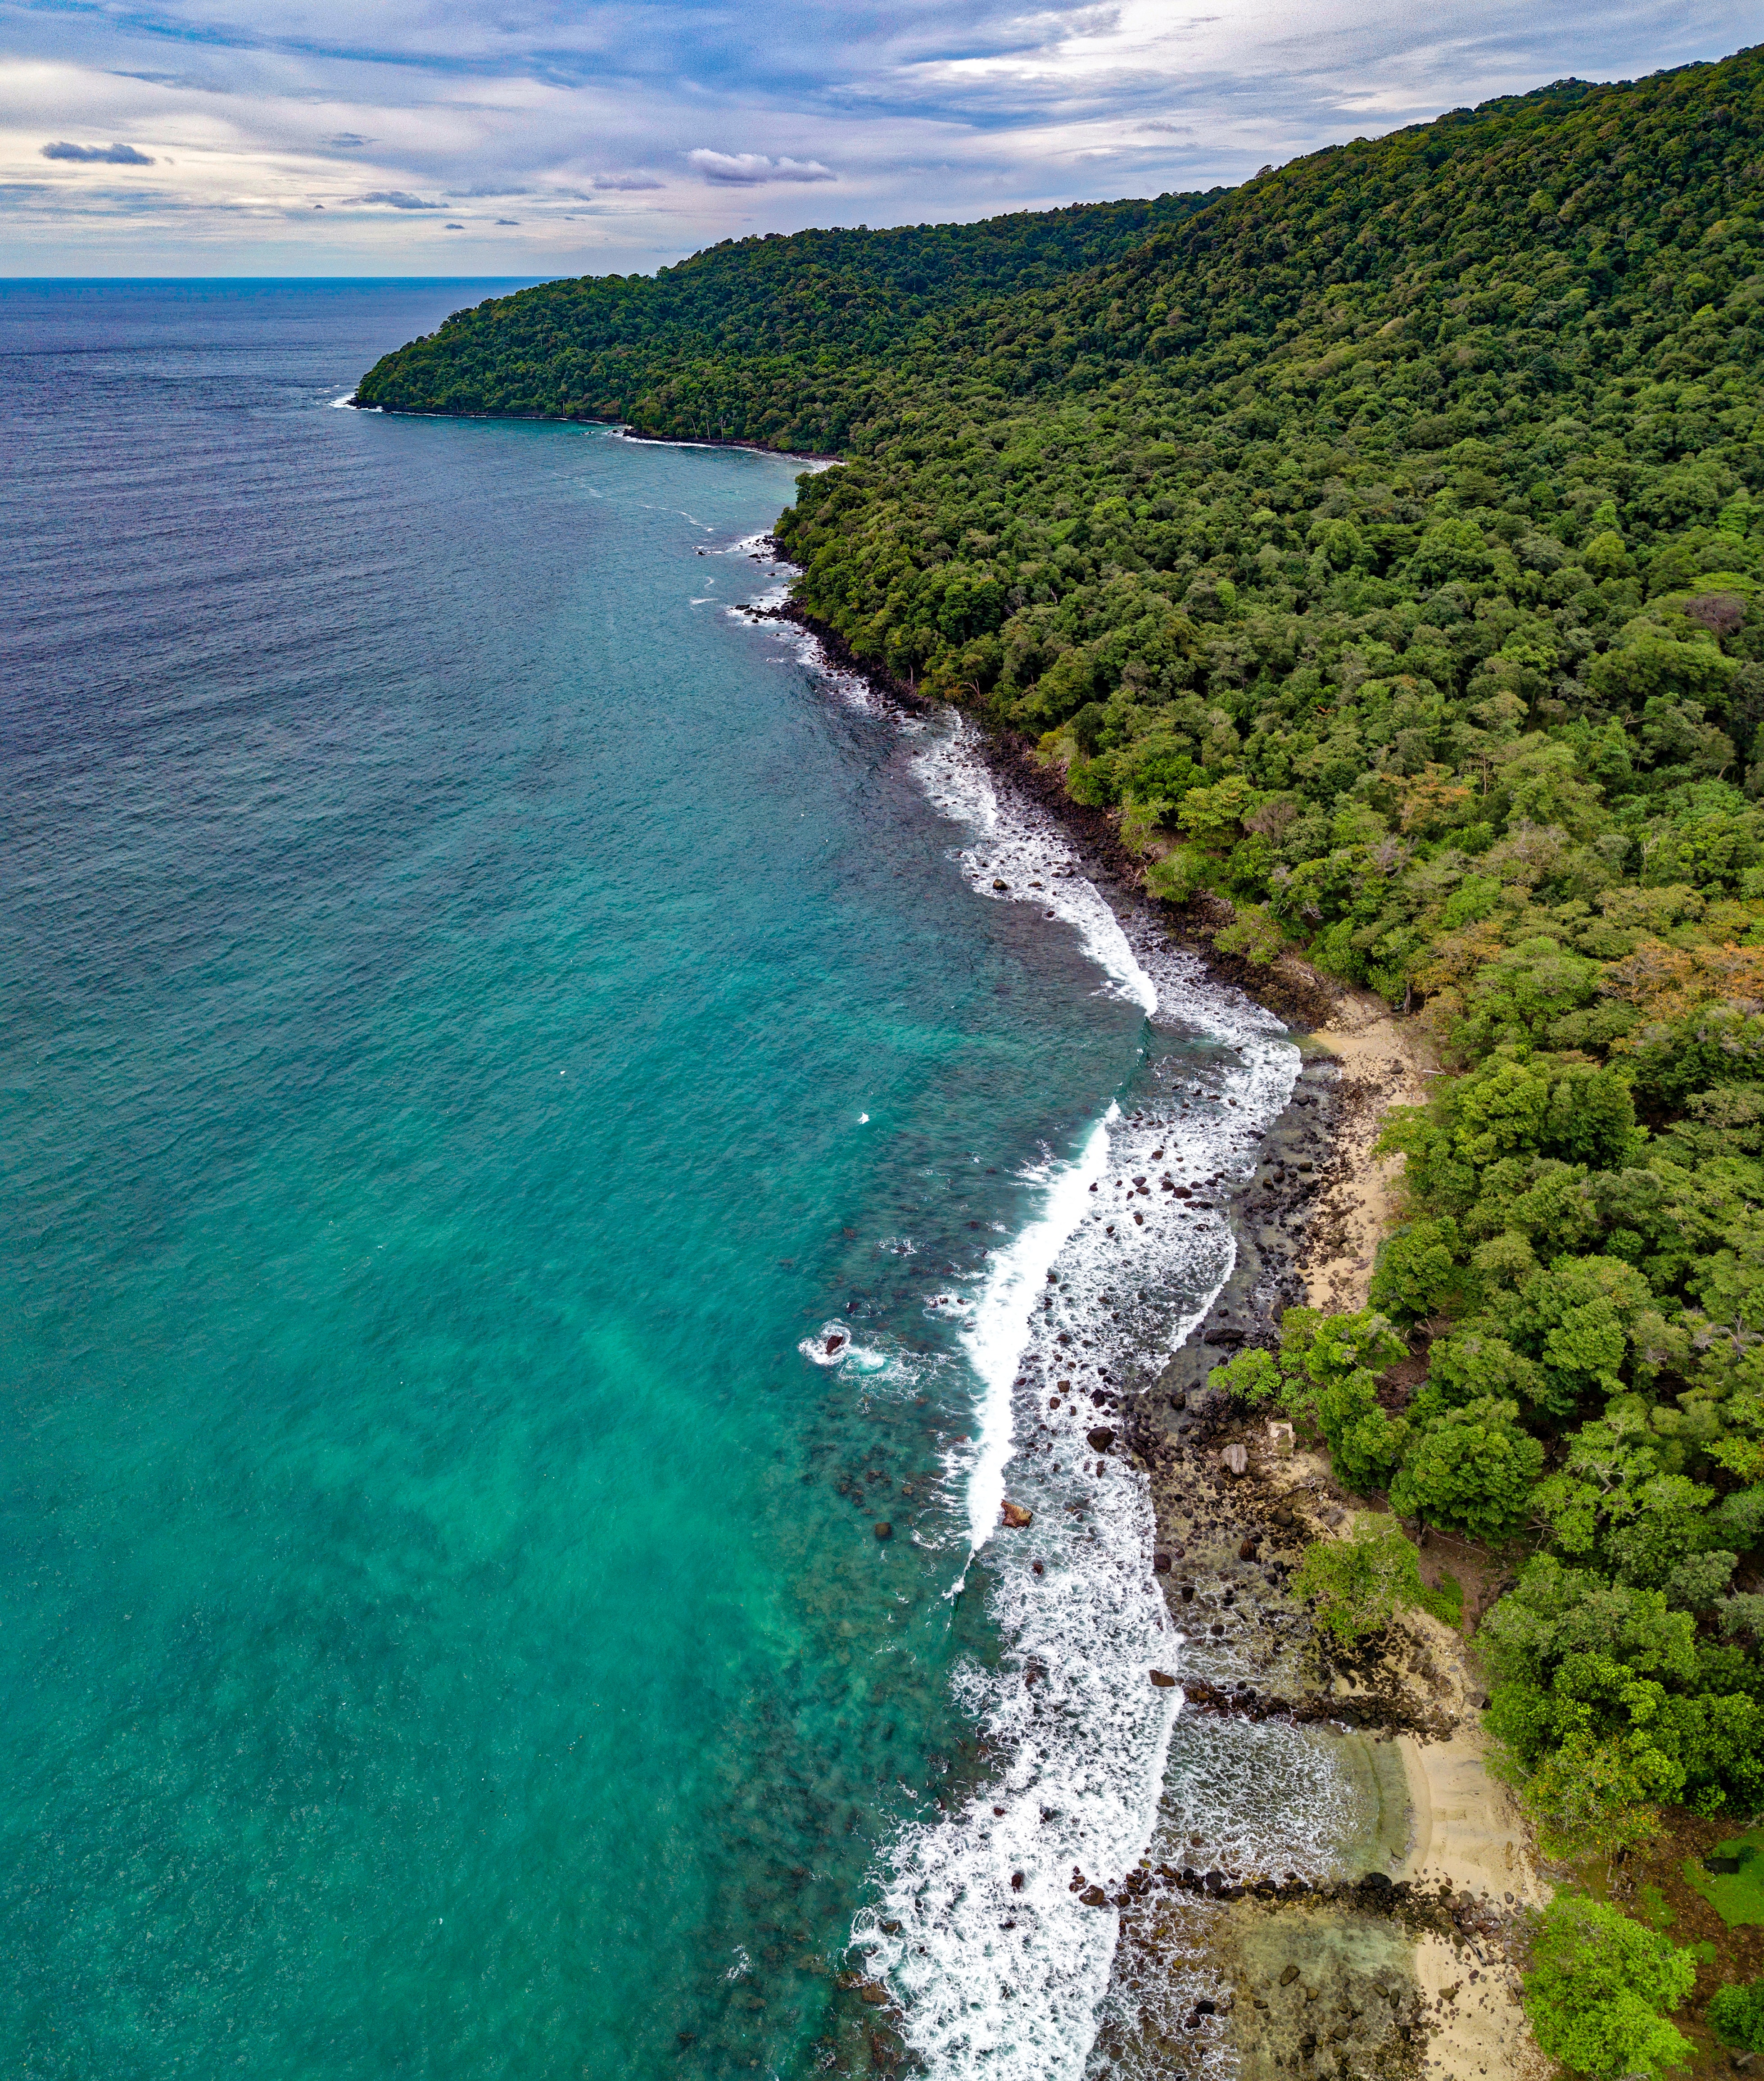 vegetation, beach, nature, view from above, shore, bank, ocean UHD